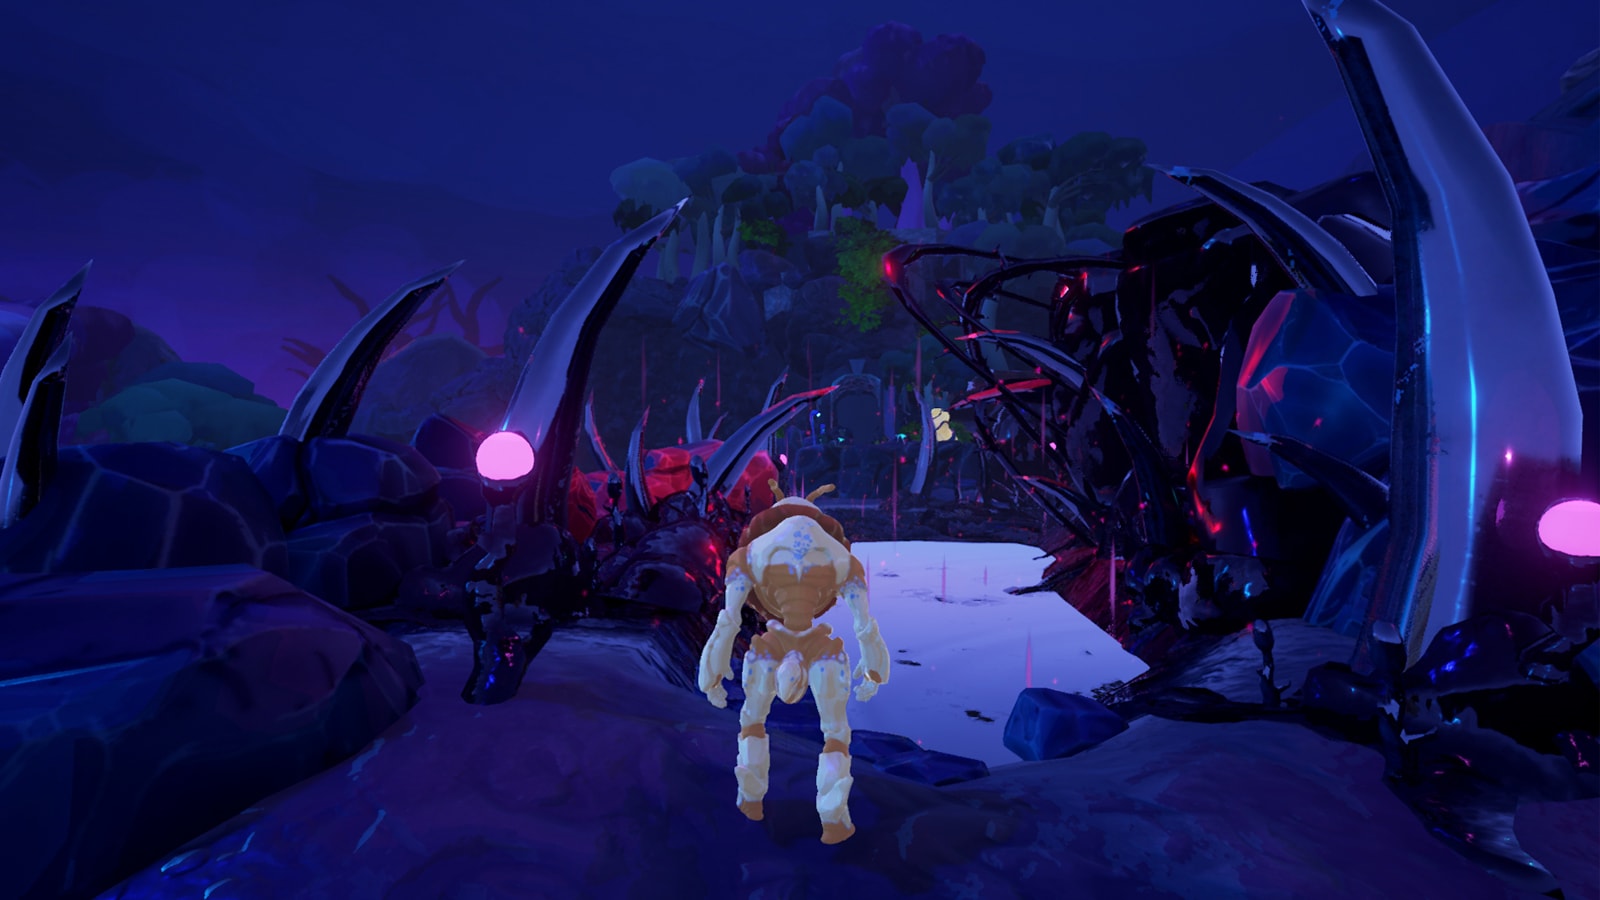 The game's alien hero stands amid a strange rock landscape with shiny, spiked growths emerging out of it.